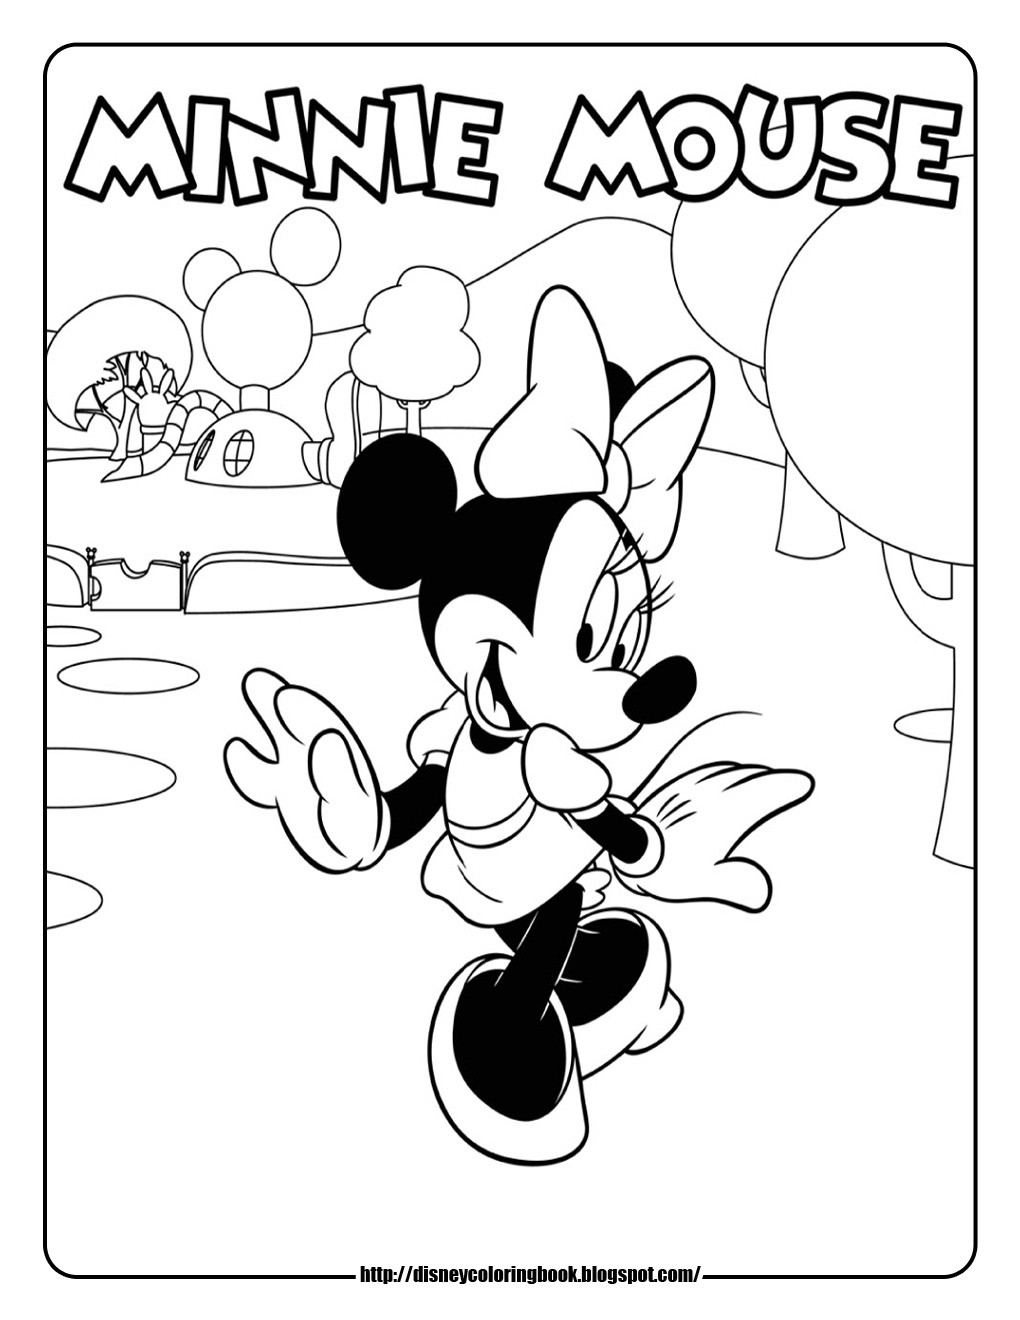 Mickey Mouse Clubhouse Printable Coloring Pages
 Disney Coloring Pages and Sheets for Kids Mickey Mouse